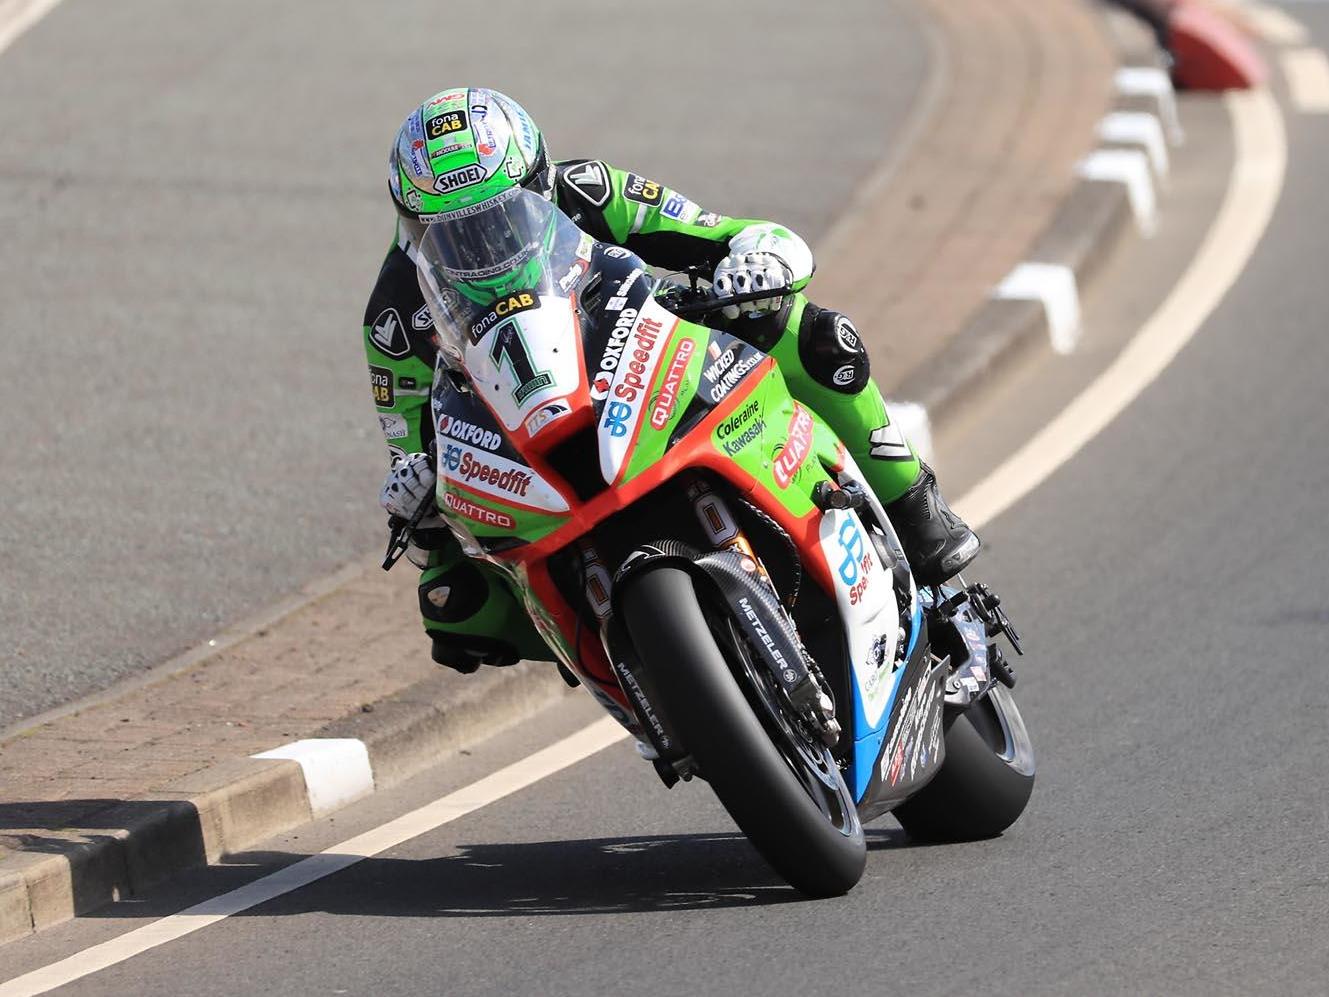 Glenn Irwin took pole position for the North West 200 superbike races